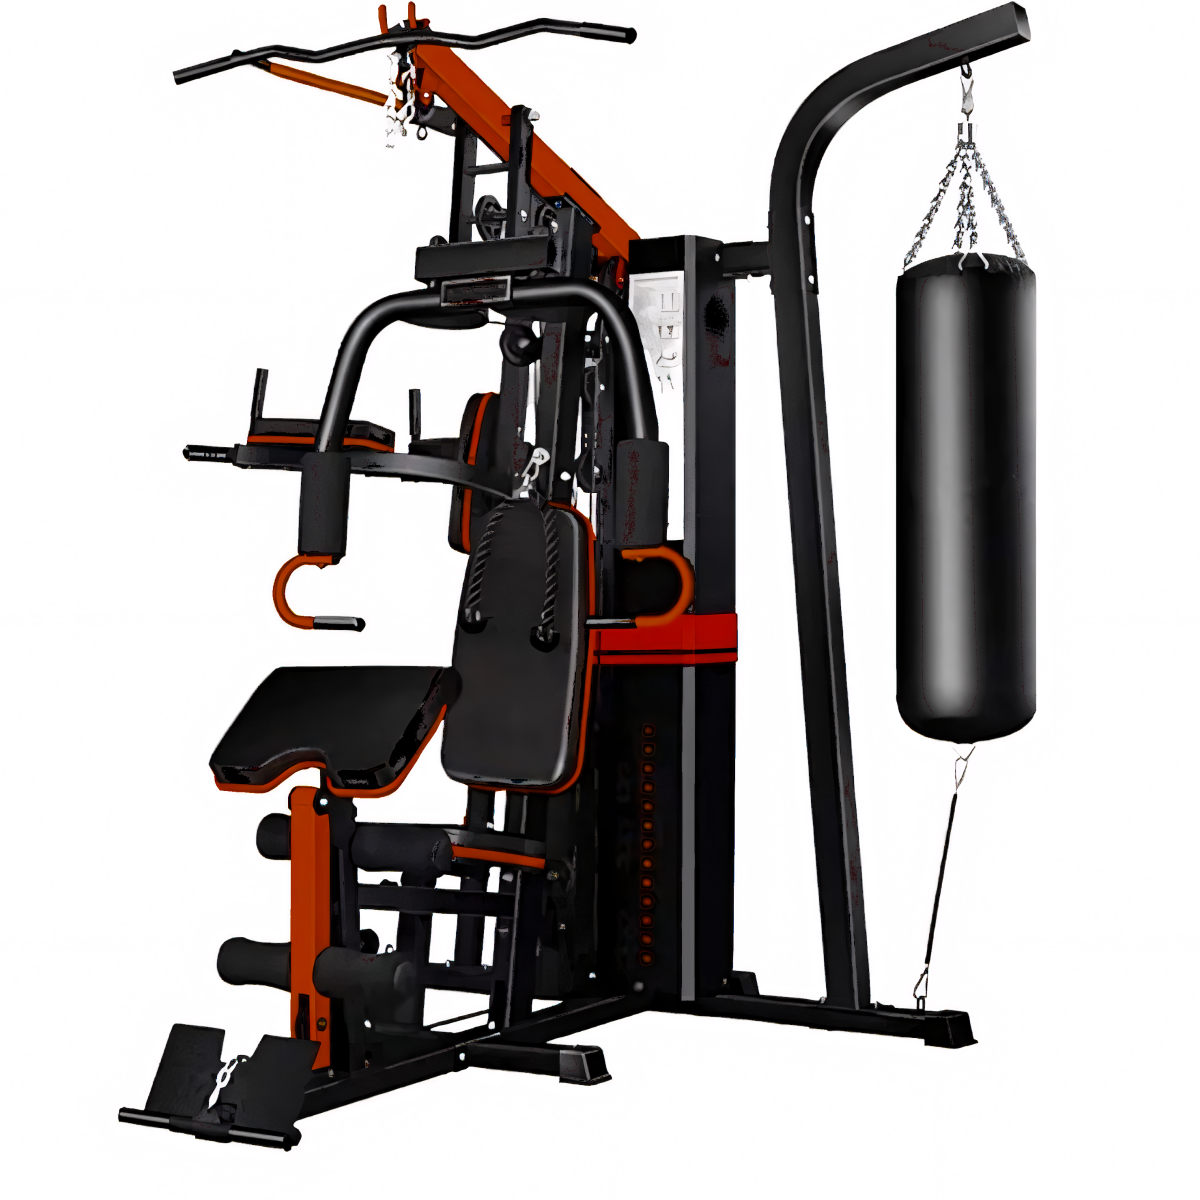 Multi-function Gym Machine | All-in-One Fitness Station